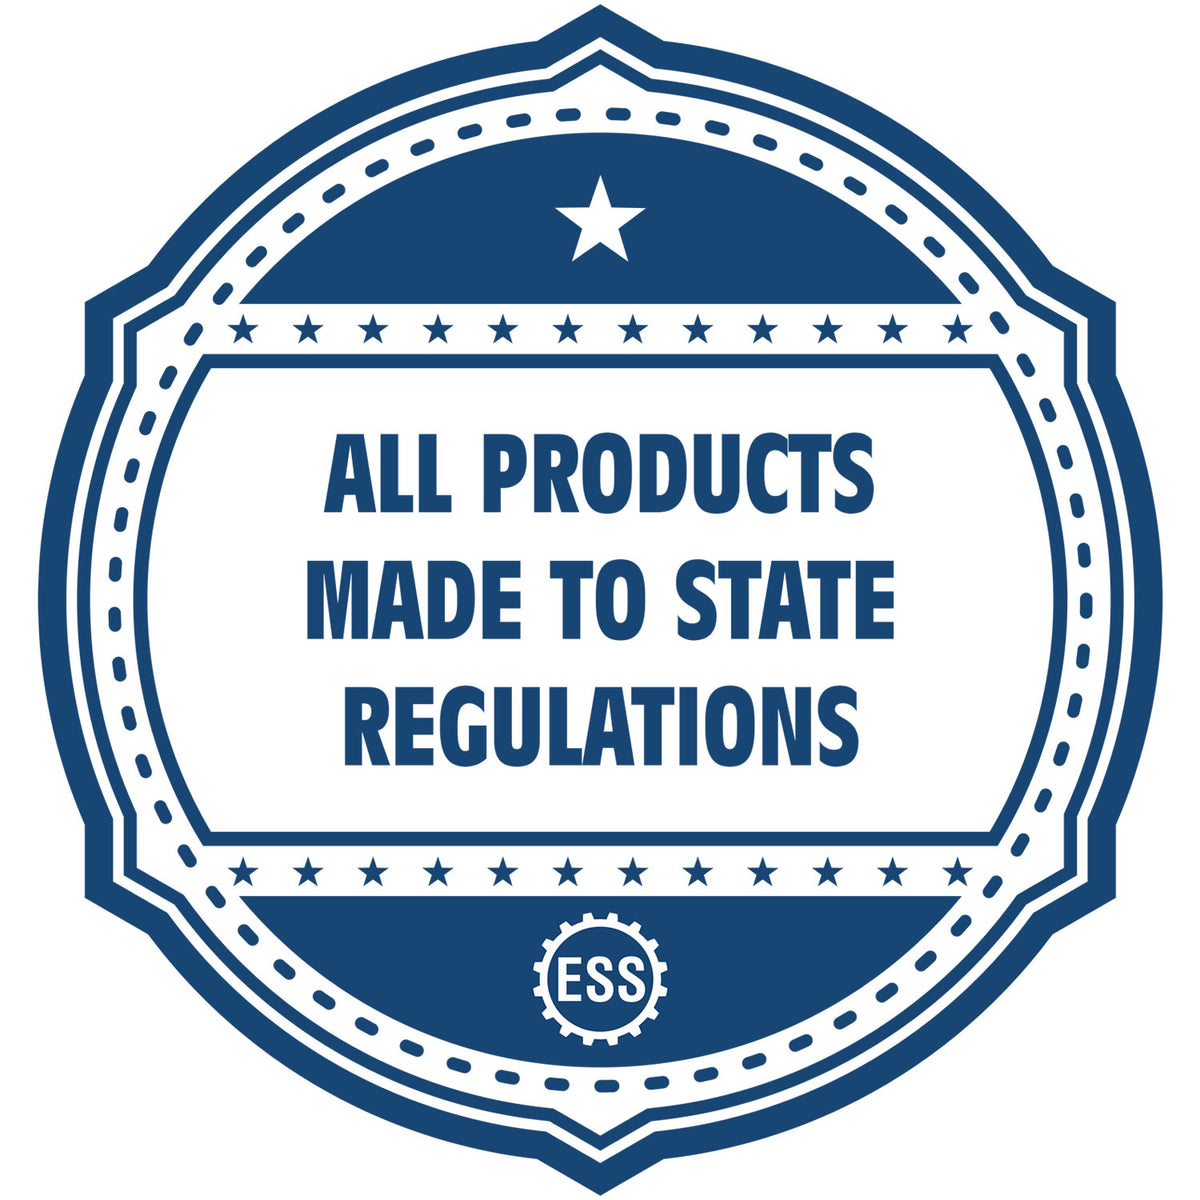 An icon or badge element for the Slim Pre-Inked Indiana Architect Seal Stamp showing that this product is made in compliance with state regulations.